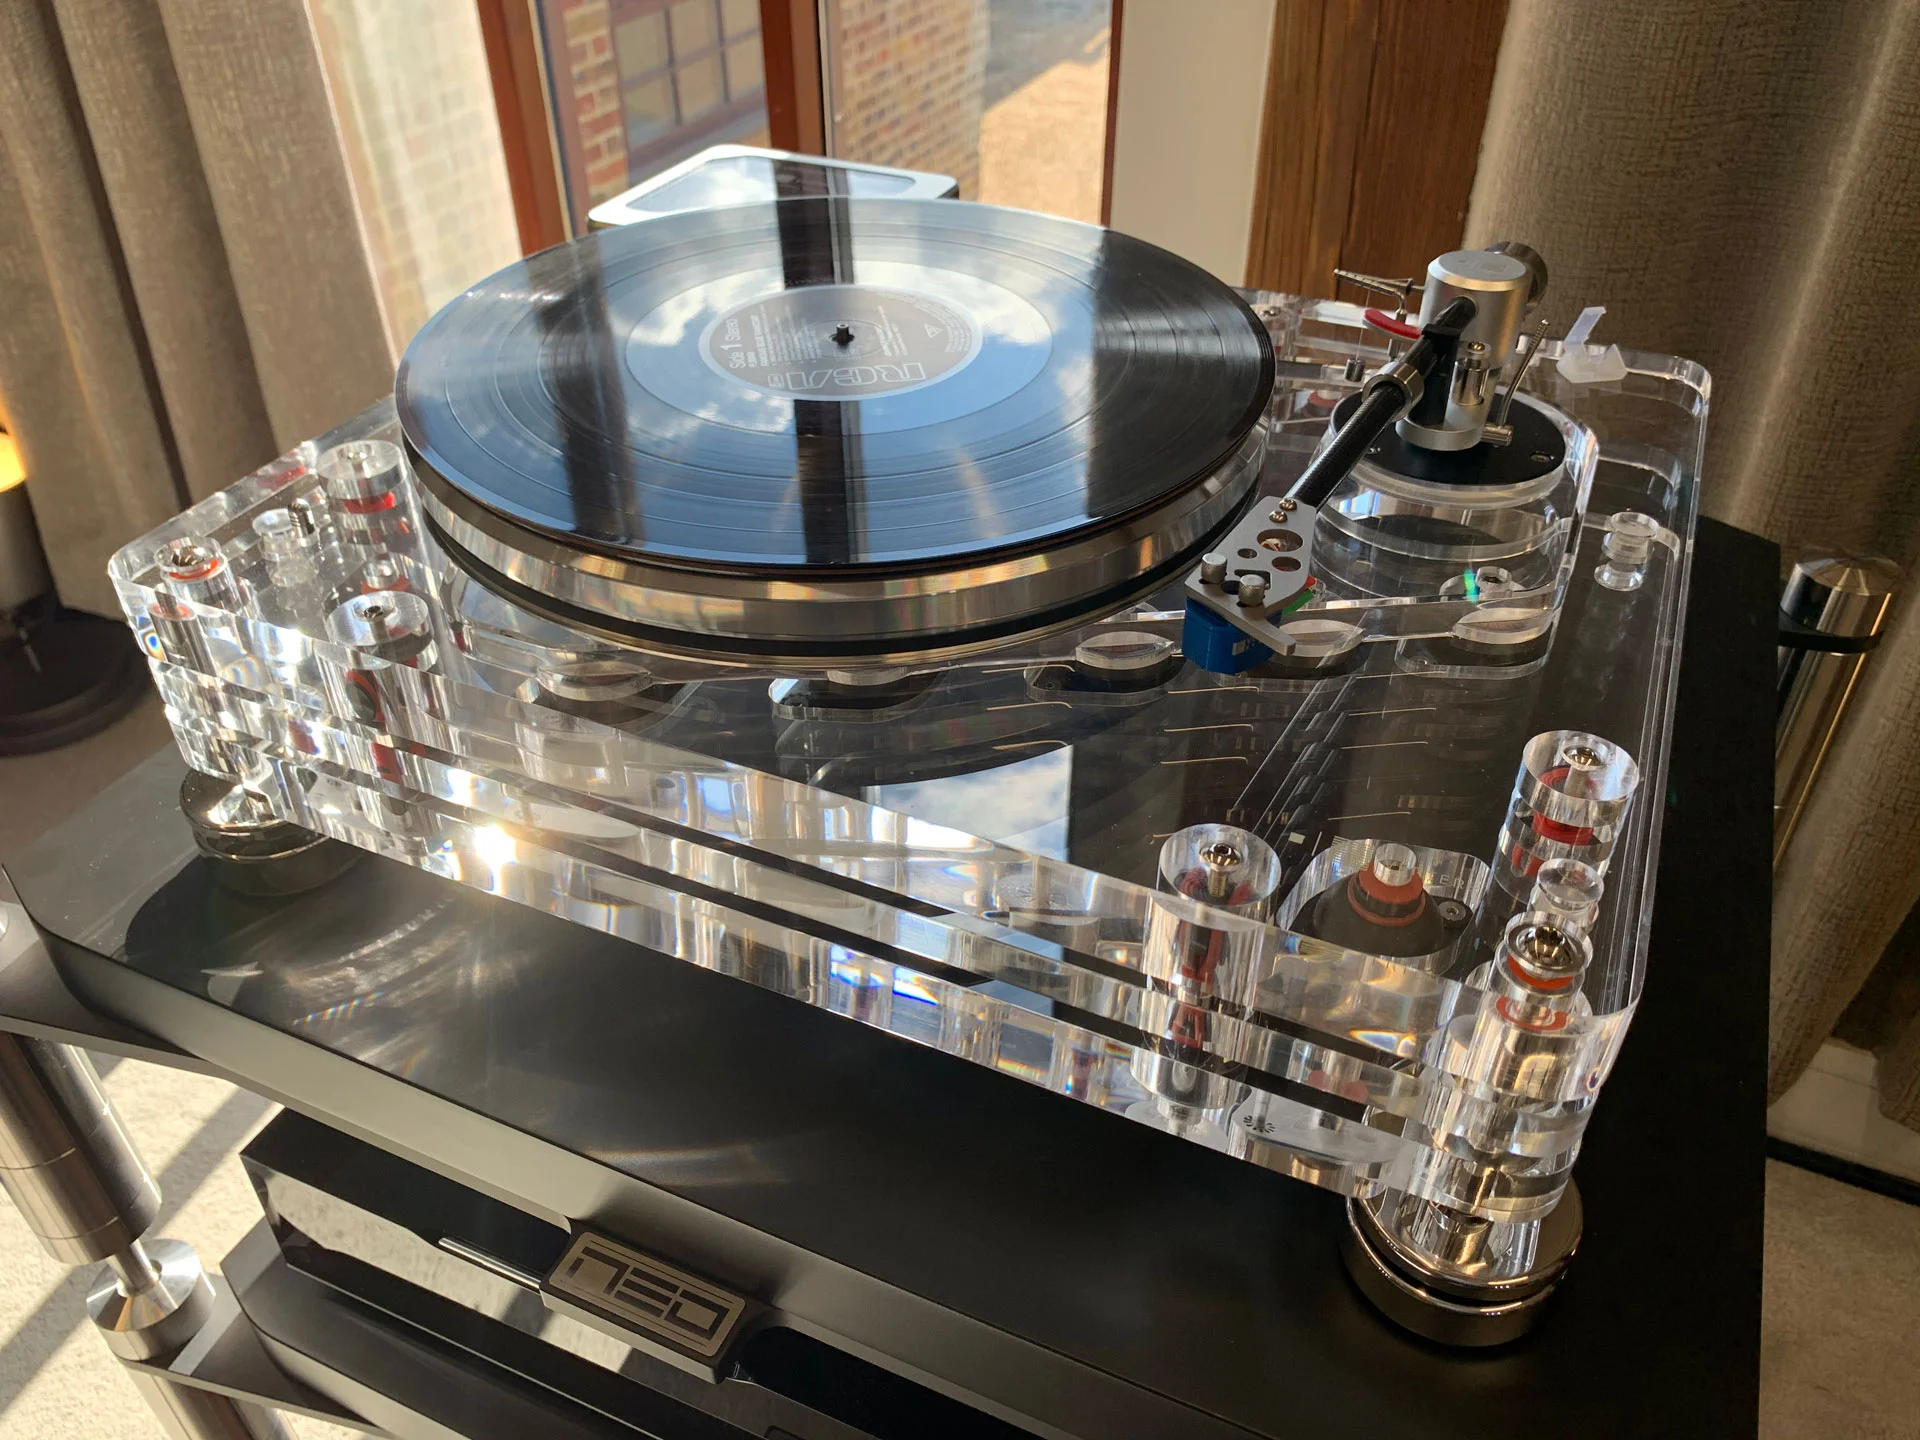 The Vertere SG-1 turntable on demonstration in our demo room